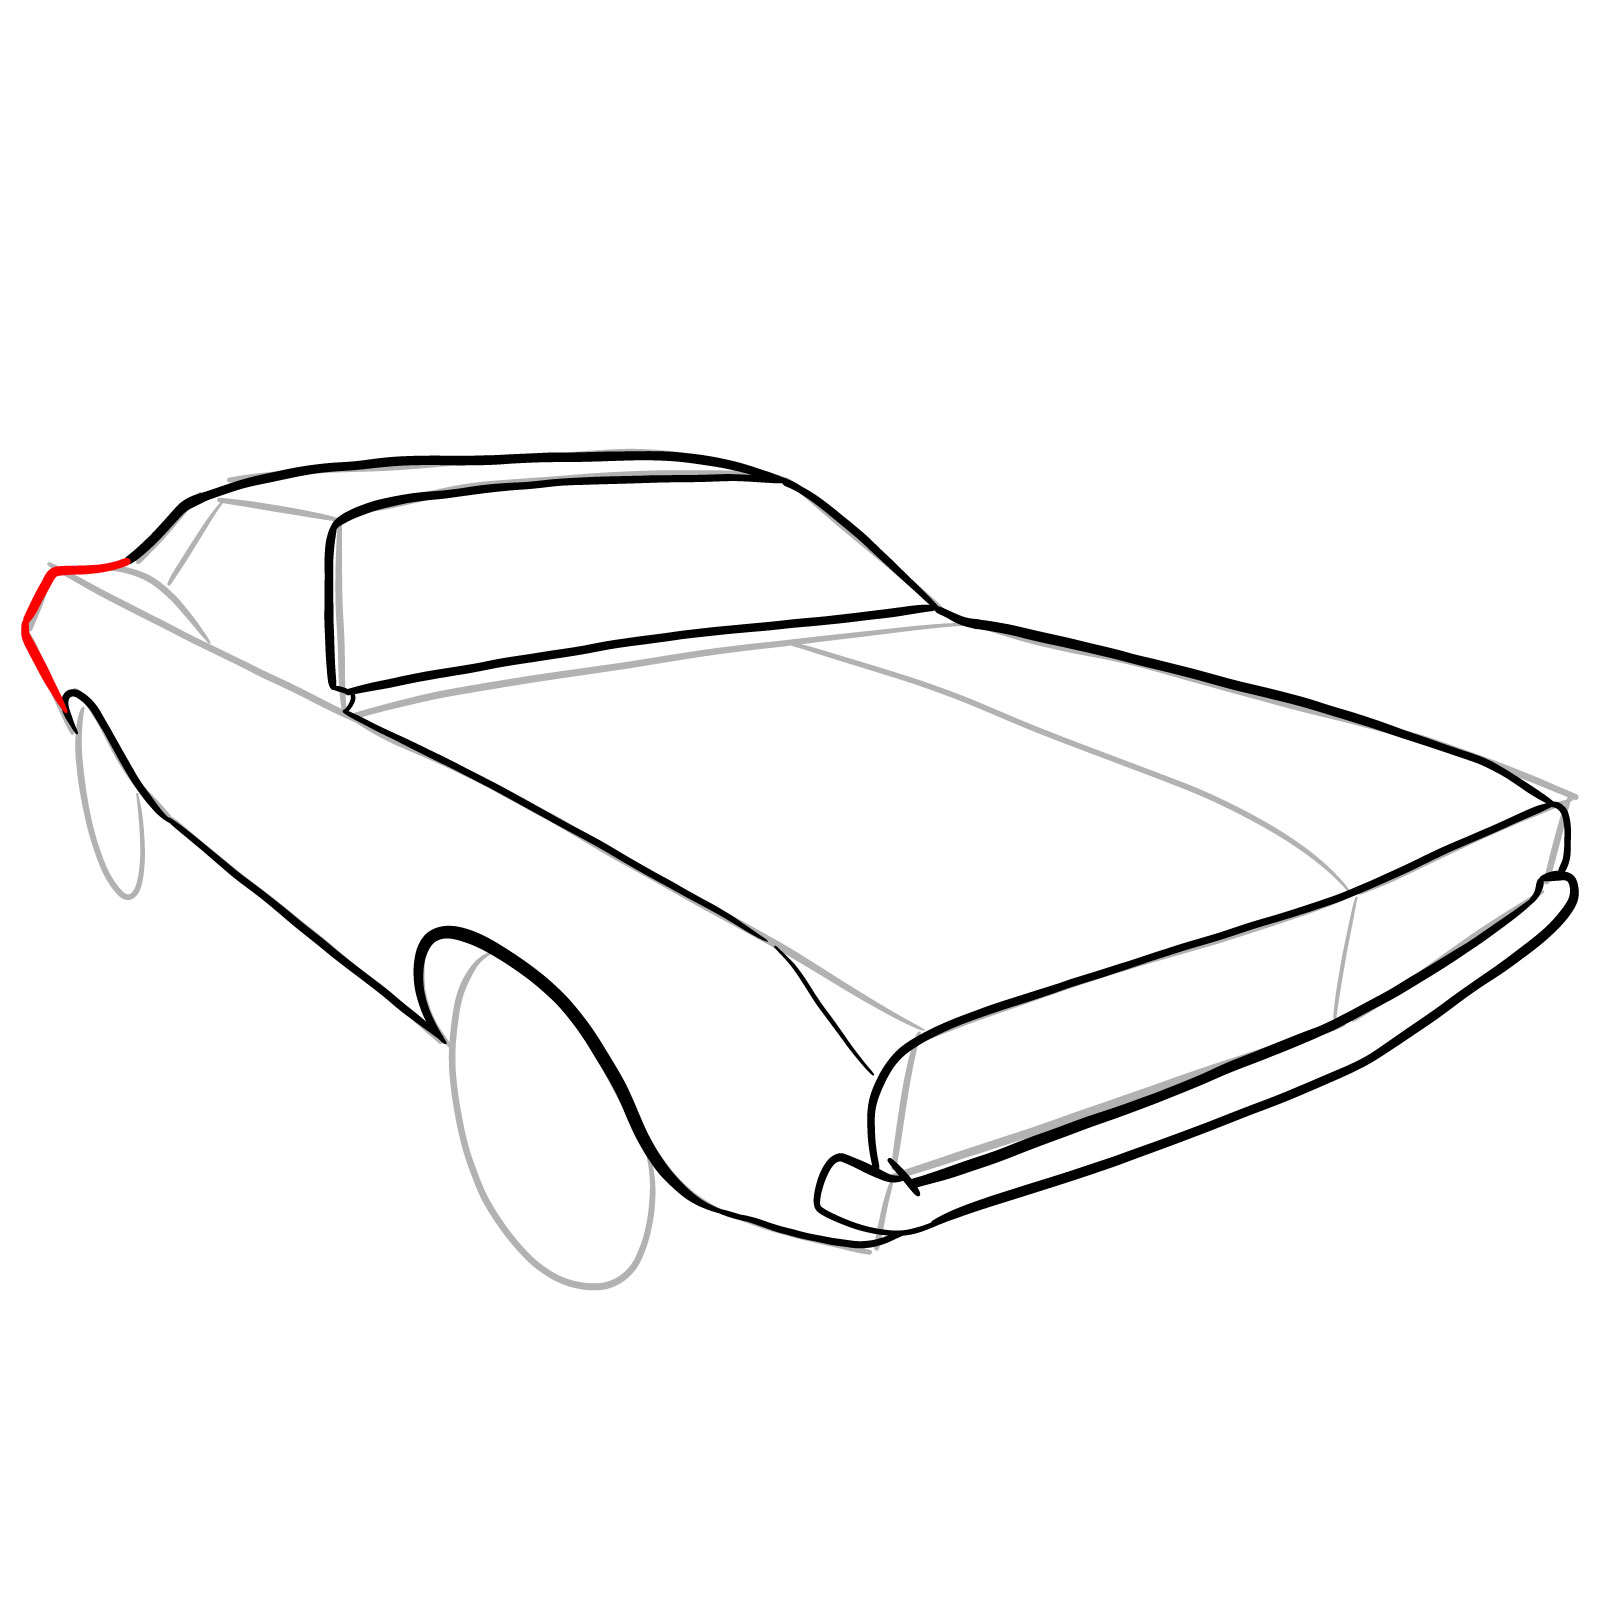 How to draw Dodge Challenger 1970 - step 13